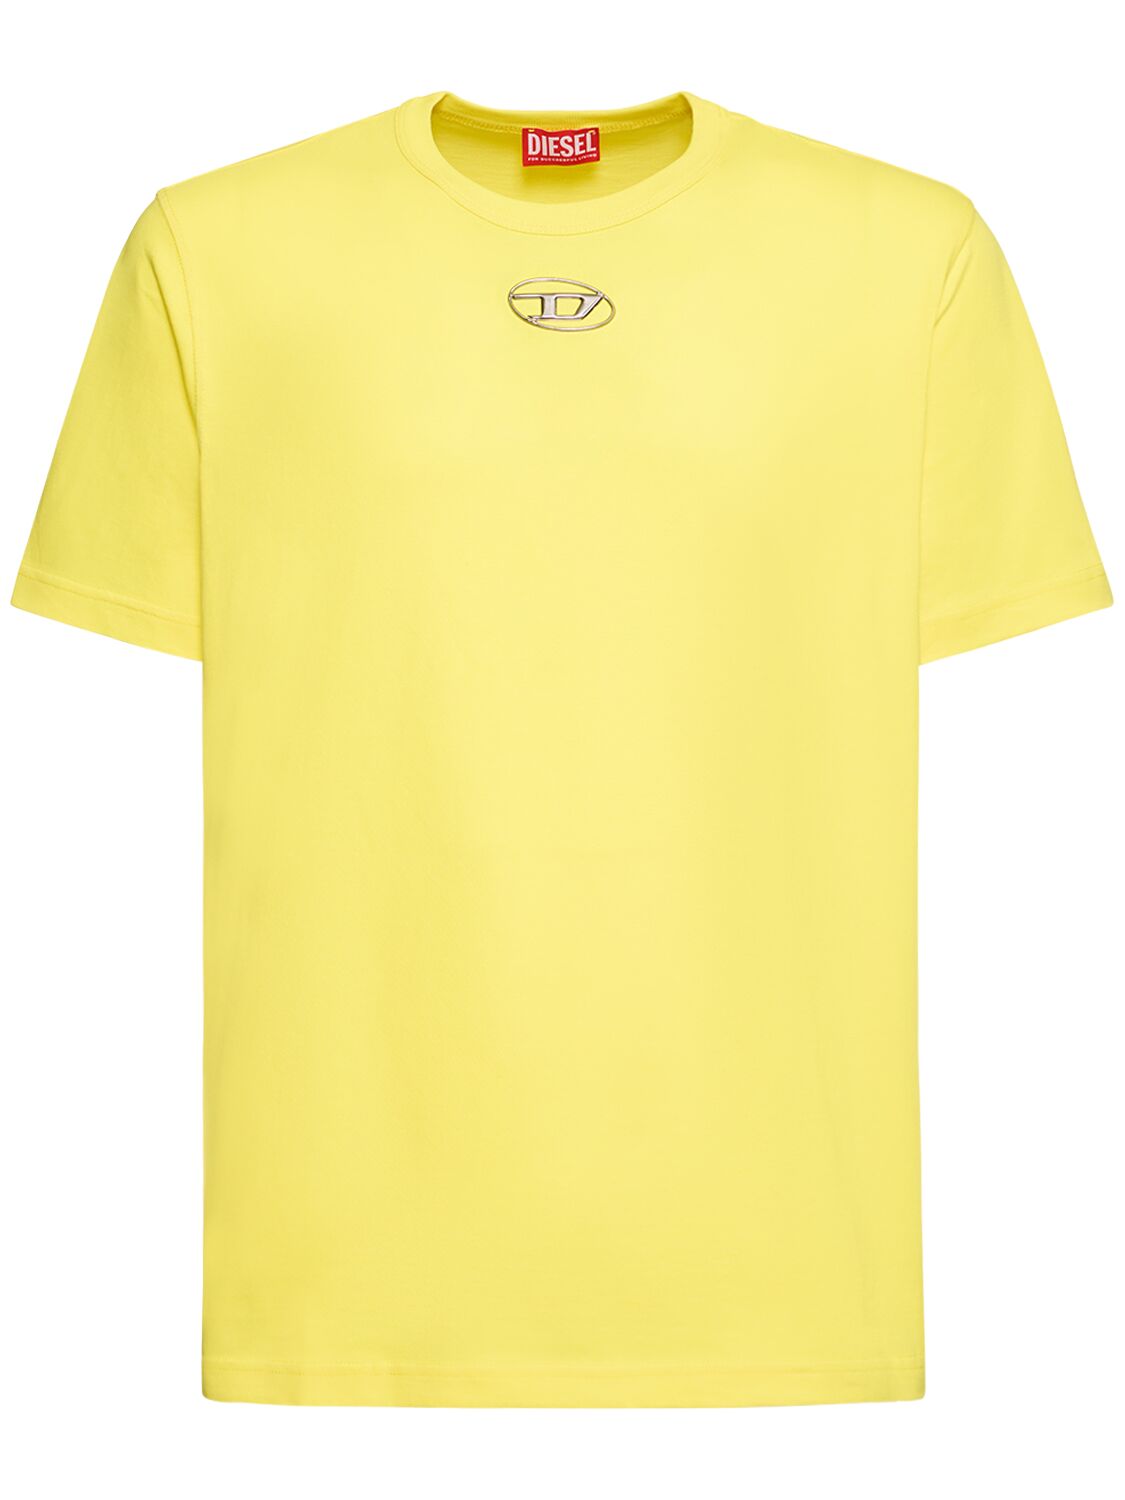 Diesel Oval-d Mold Print Cotton Jersey T-shirt In Lime Green